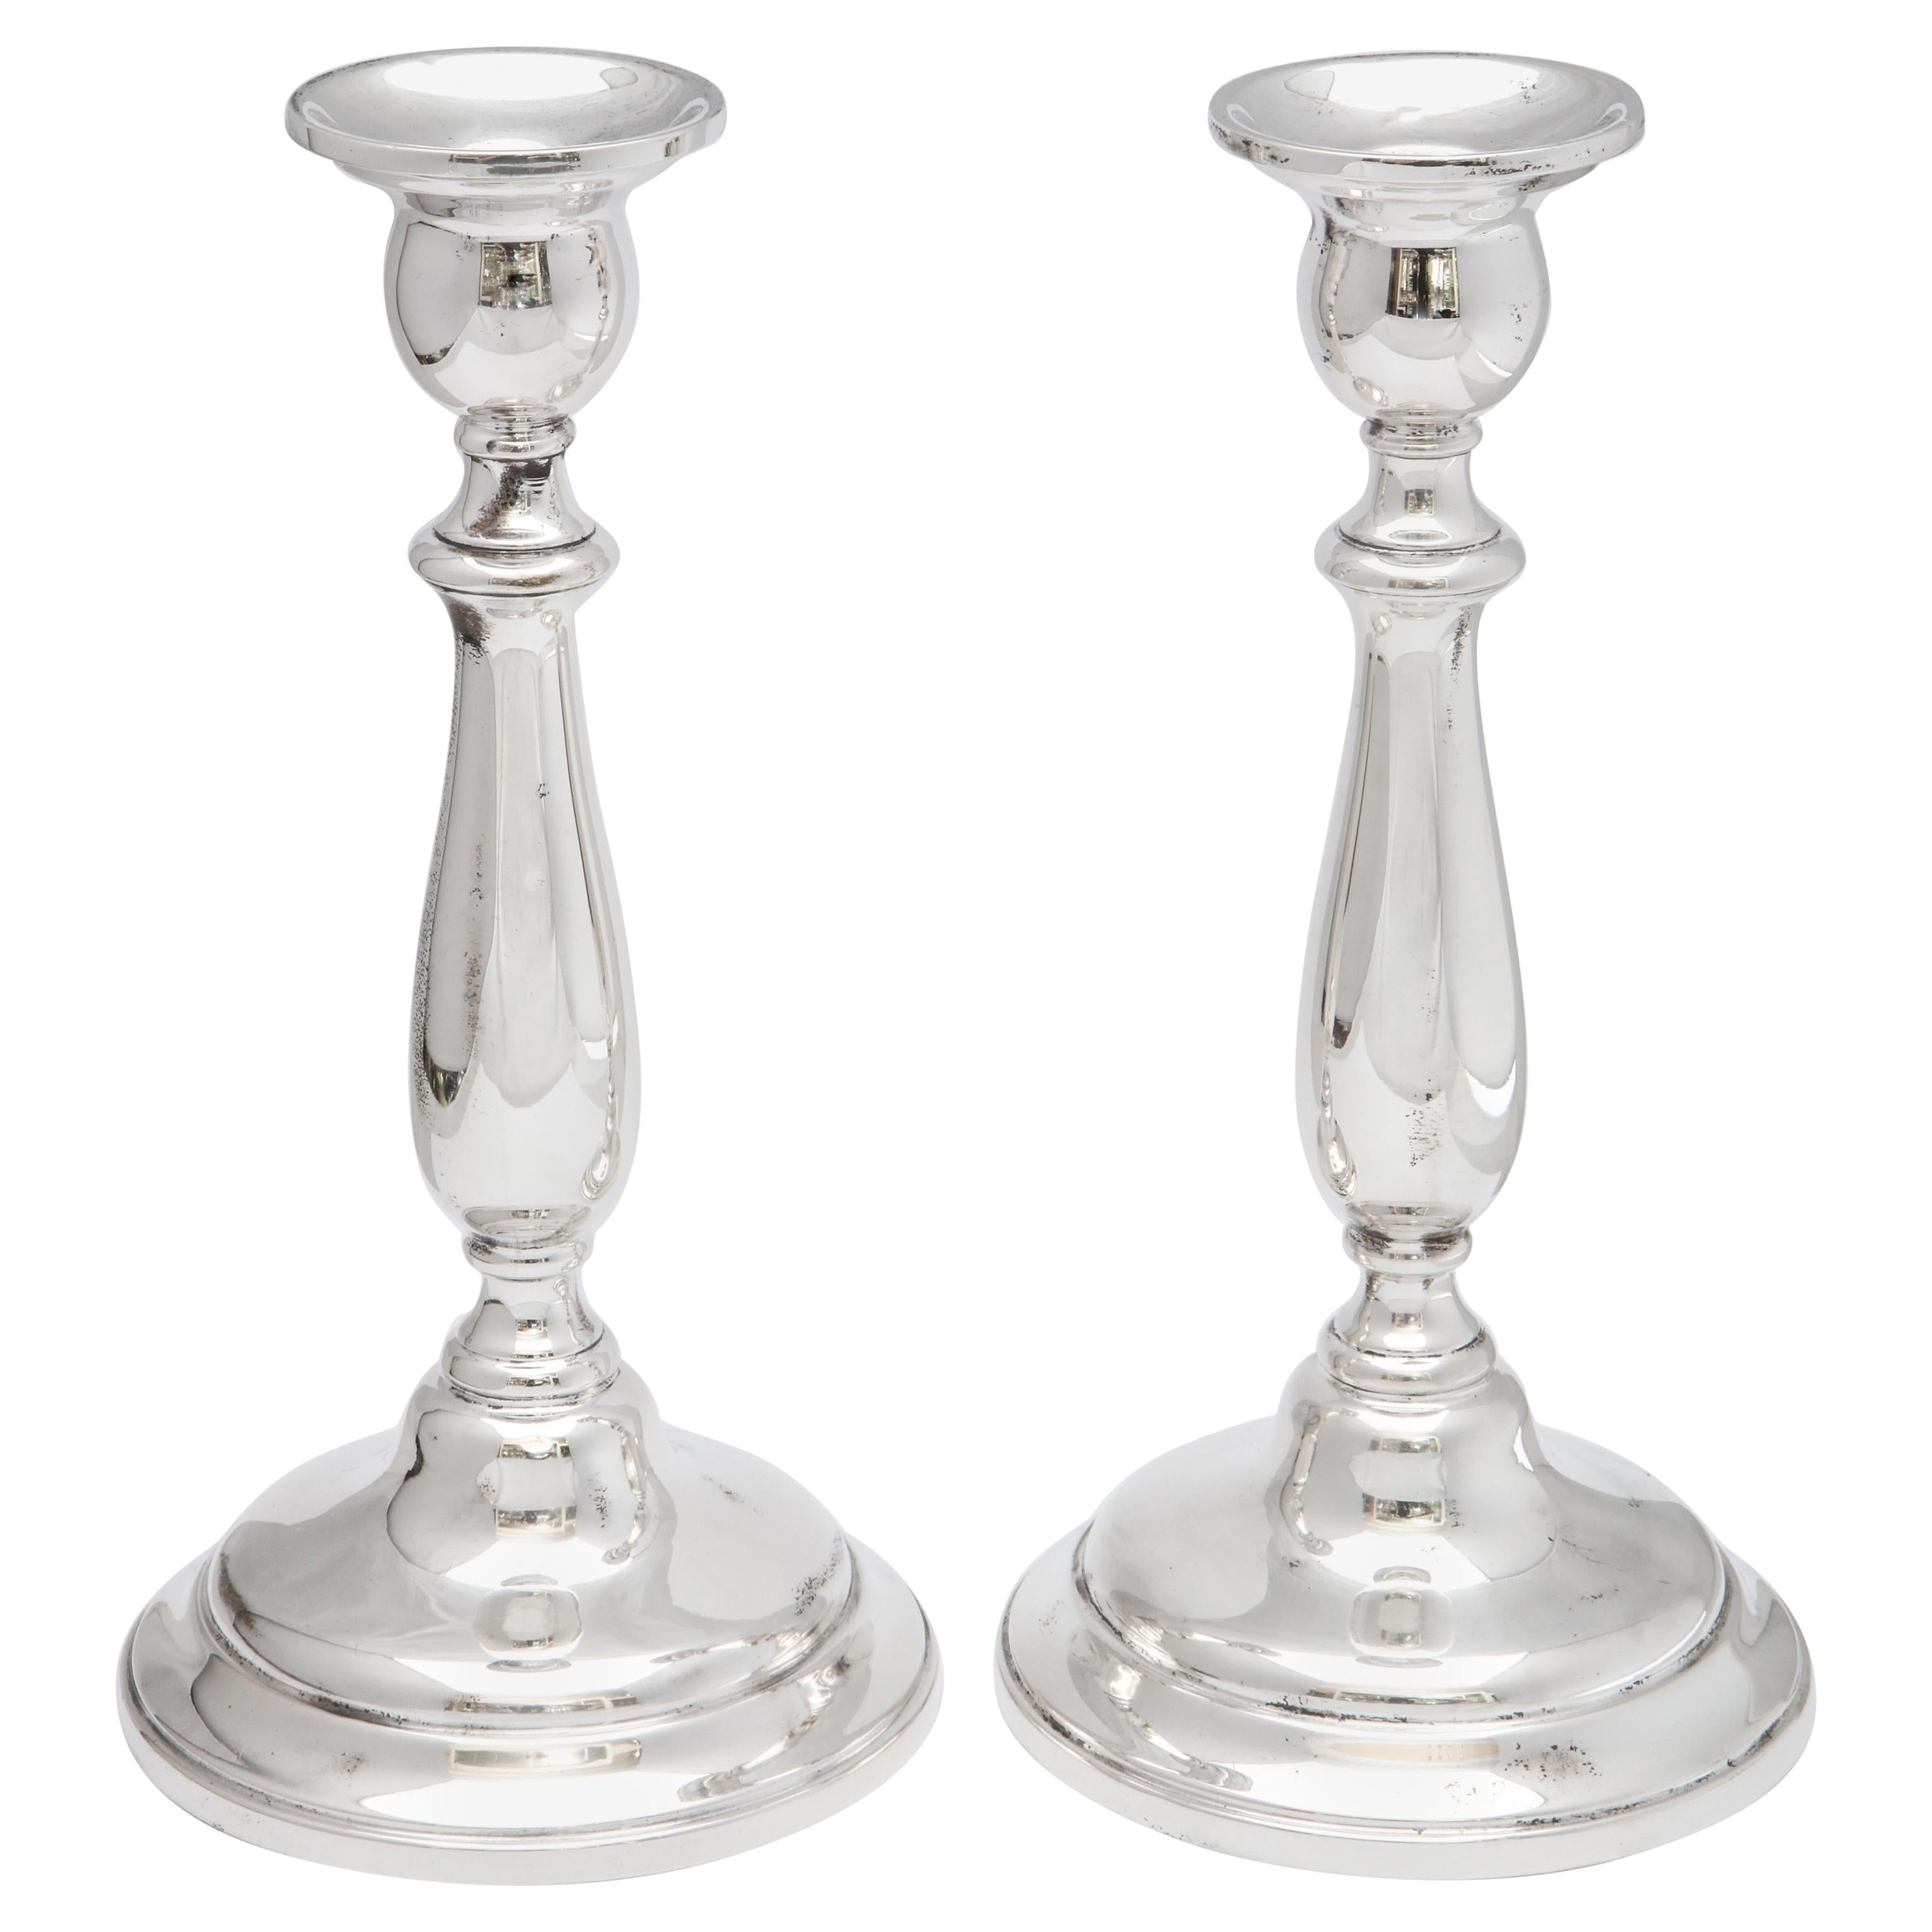 Pair of Tall Sterling Silver Empire-Style Candlesticks